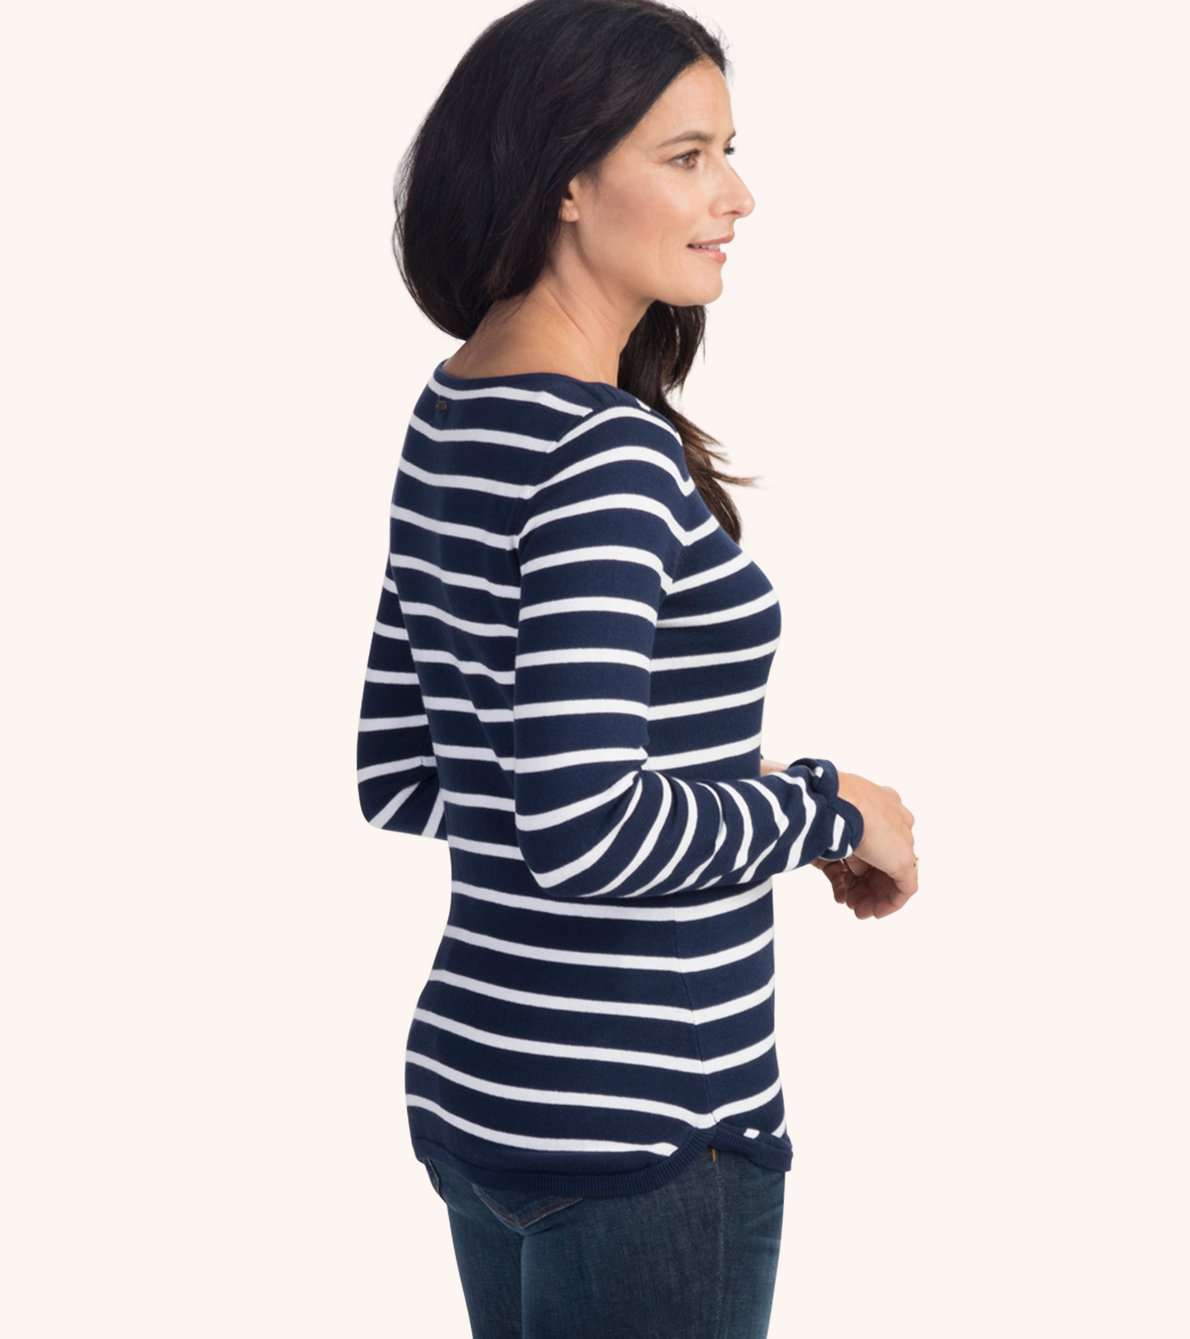 View larger image of Navy and White Stripes Breton Top